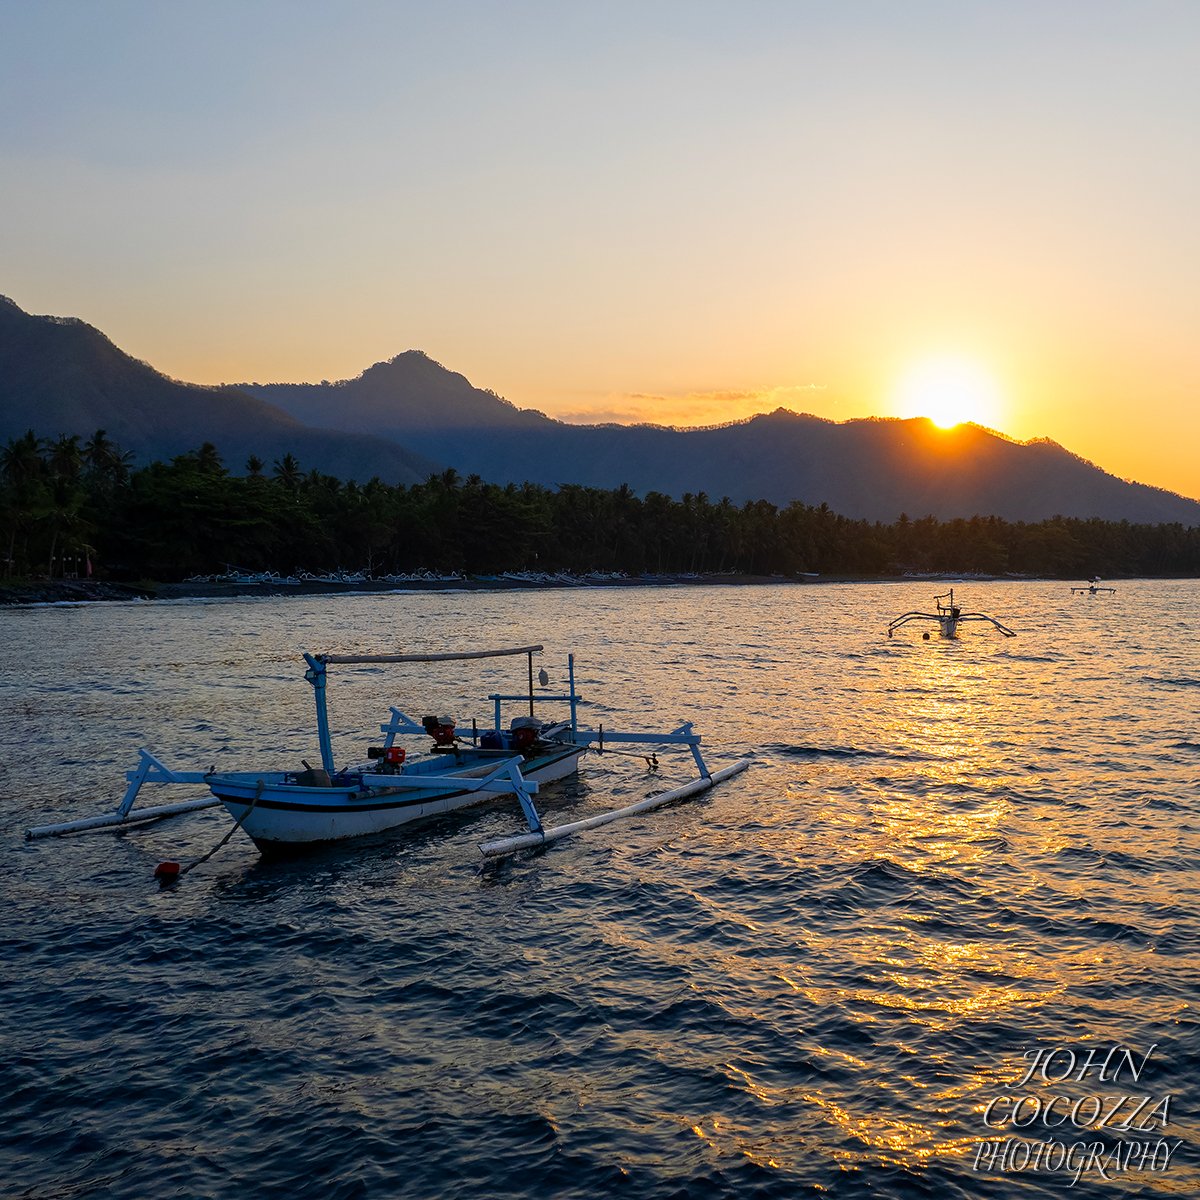 The first evening at @desasaya, I took the drone out to capture the sunset over the North Bali mountains.  Loved using the local fishing boats in the composition. 
.
#bali #desasaya #yogaretreats #reachyogasd #travel #adventure #travelphotographer #balinorthcoast #balisunsets